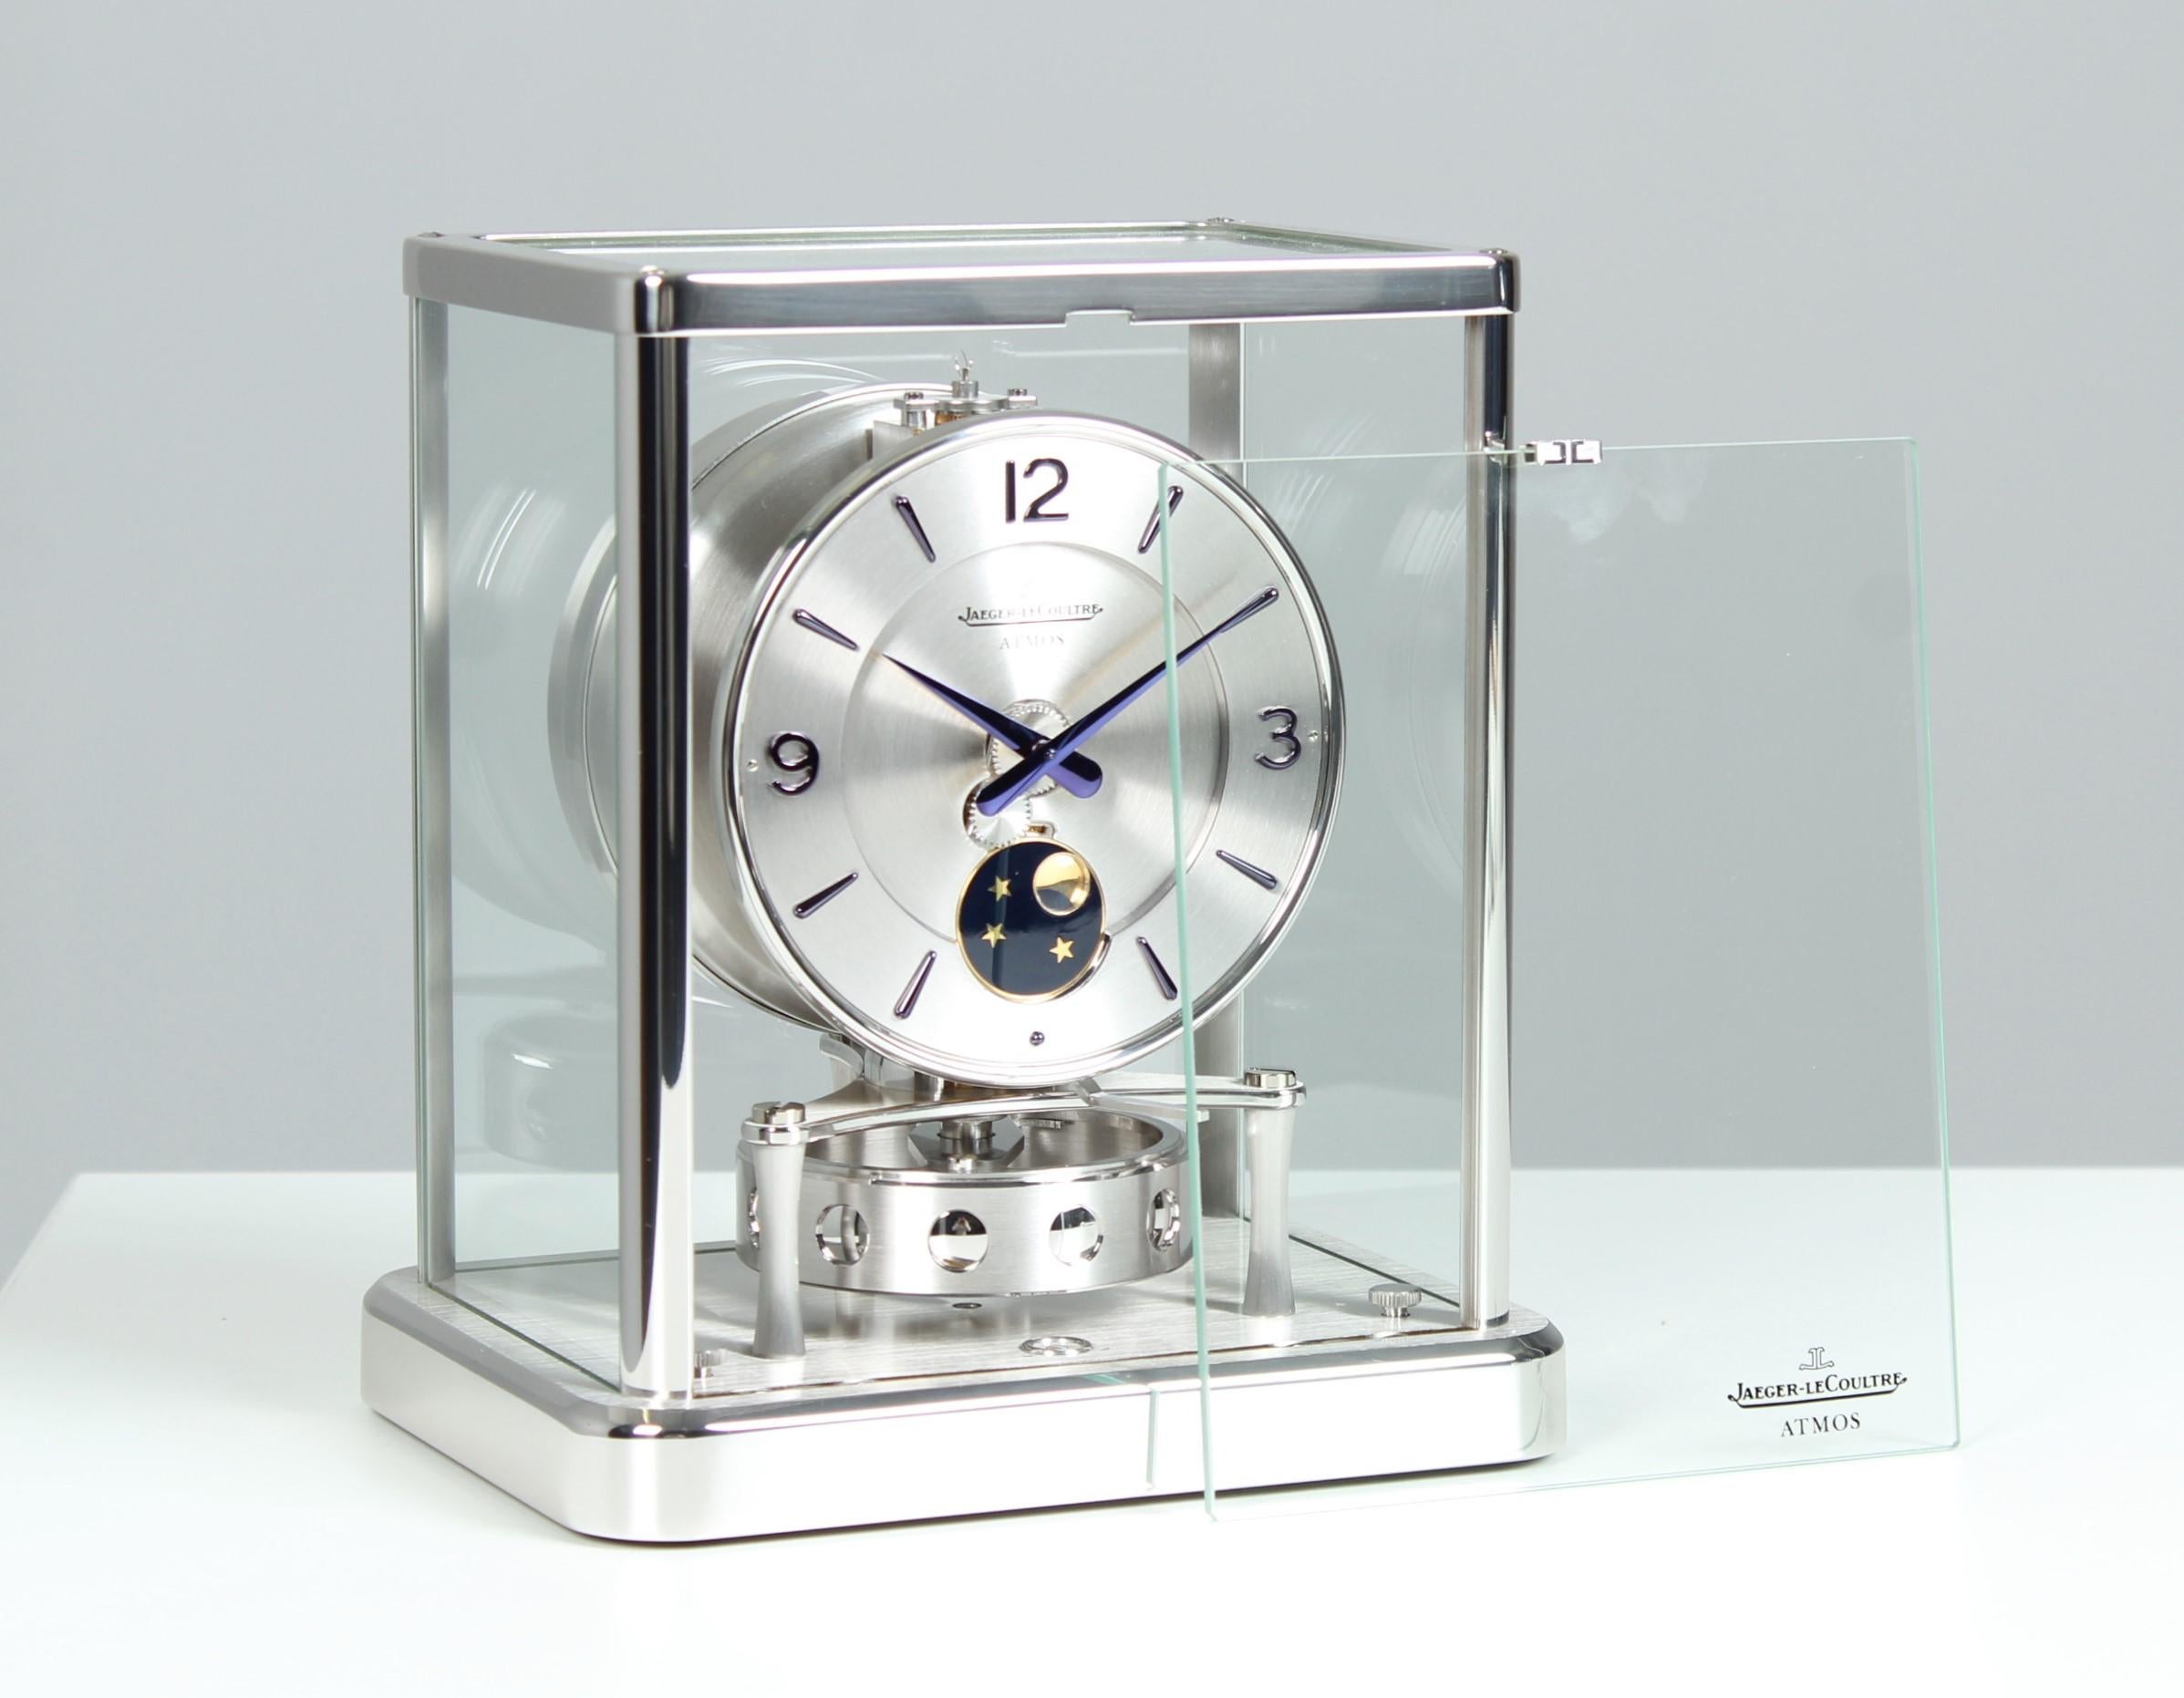 Modern Jaeger LeCoultre, Atmos Clock with Moon Phase, Rhodium-plated with Wall Console